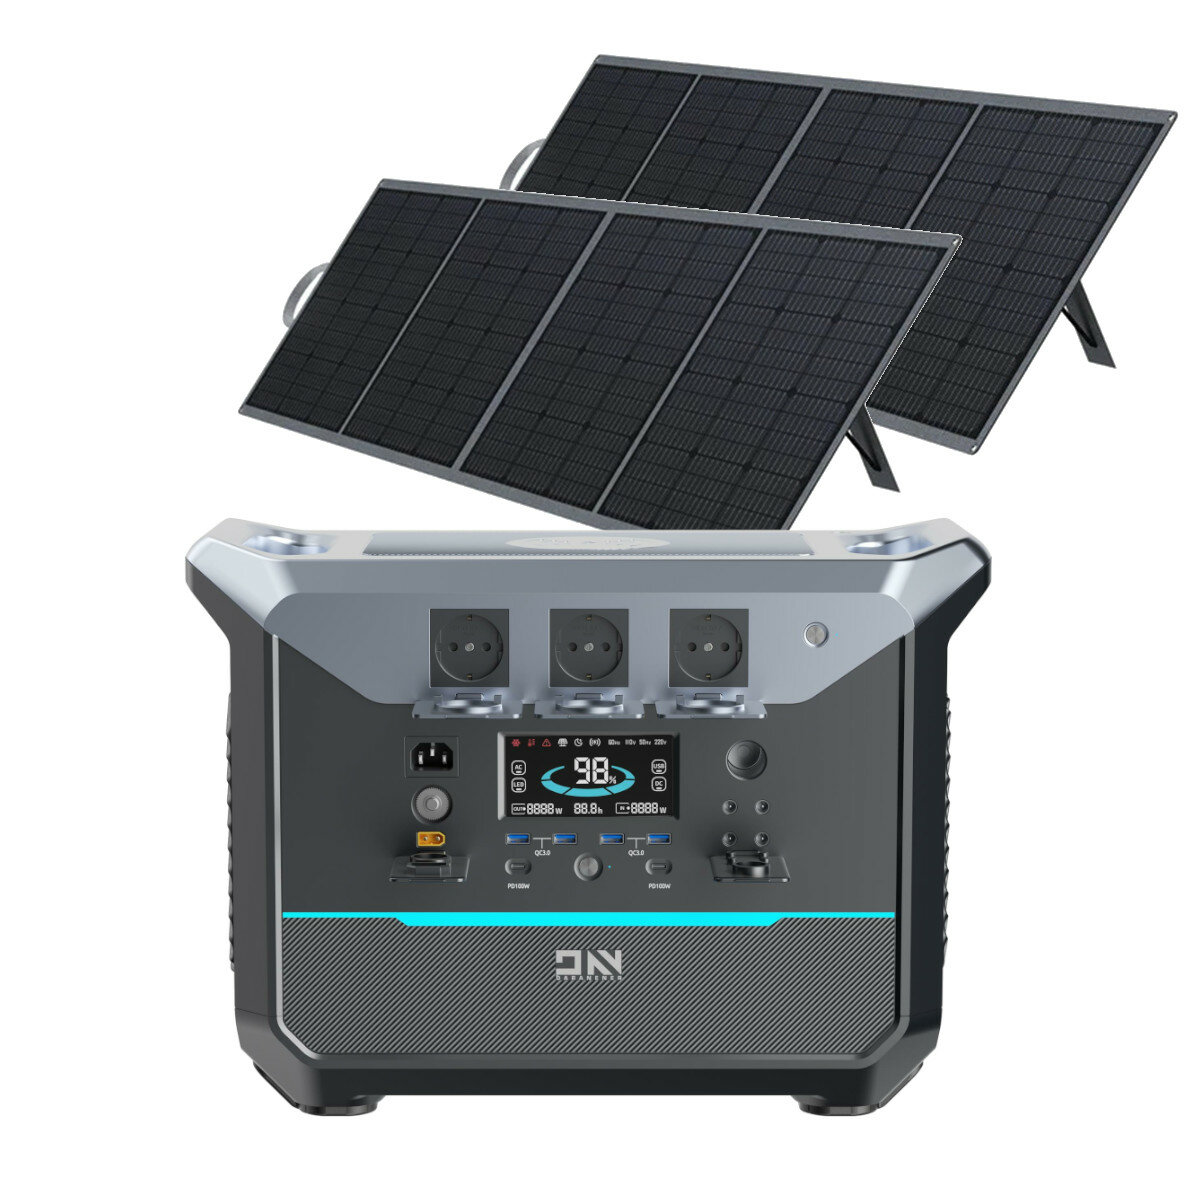 best price,daranener,neo2000,2000w,2073.6wh,lifepo4,power,station,with,2pc,sp200,200w,etfe,solar,panel,eu,coupon,price,discount